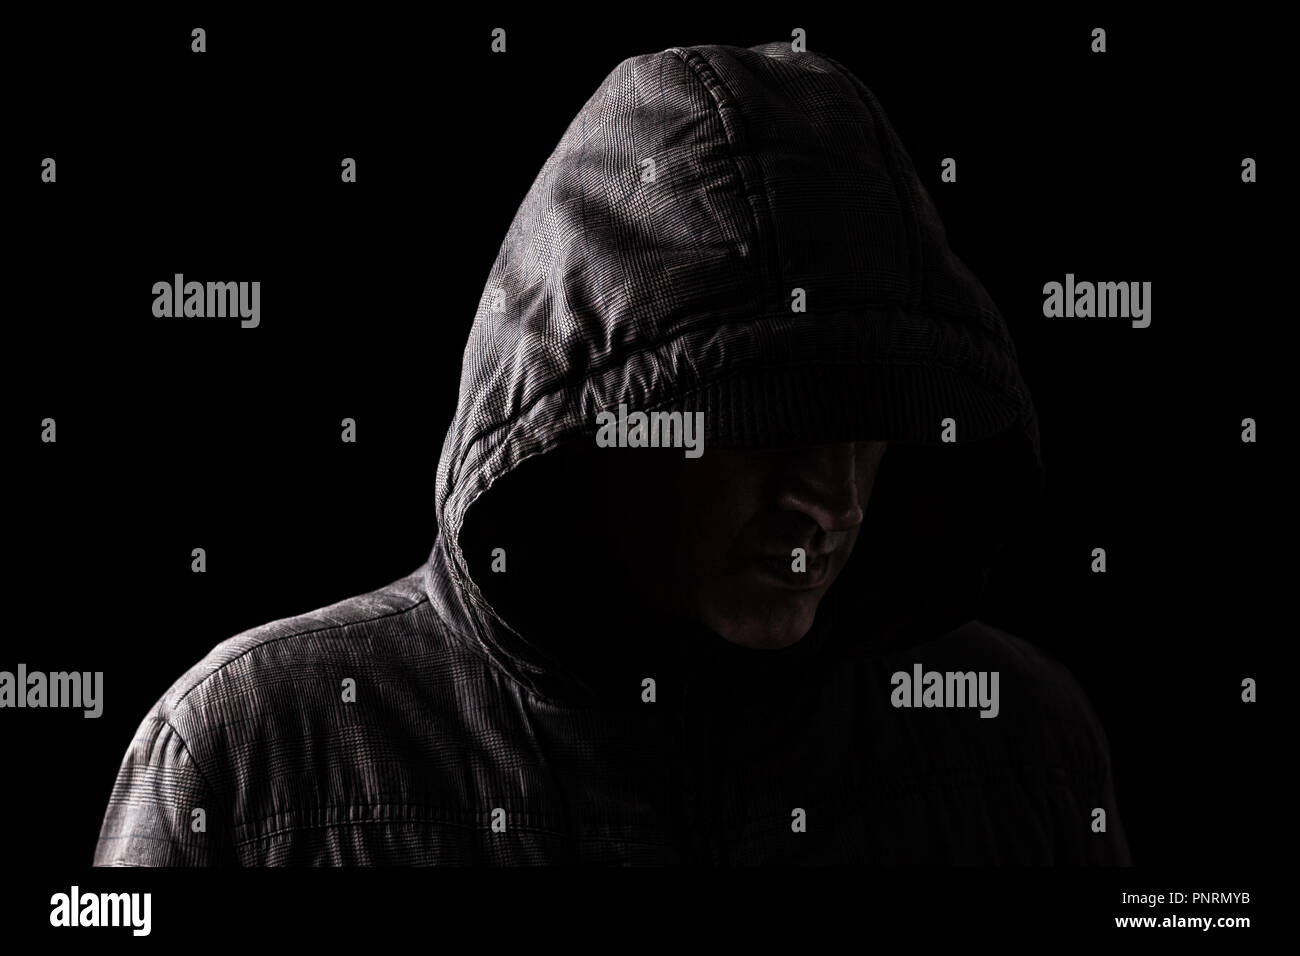 Scary and creepy caucasian or white man hiding in the shadows, with the face and identity hidden with the hood, and standing in the darkness. Low key, Stock Photo